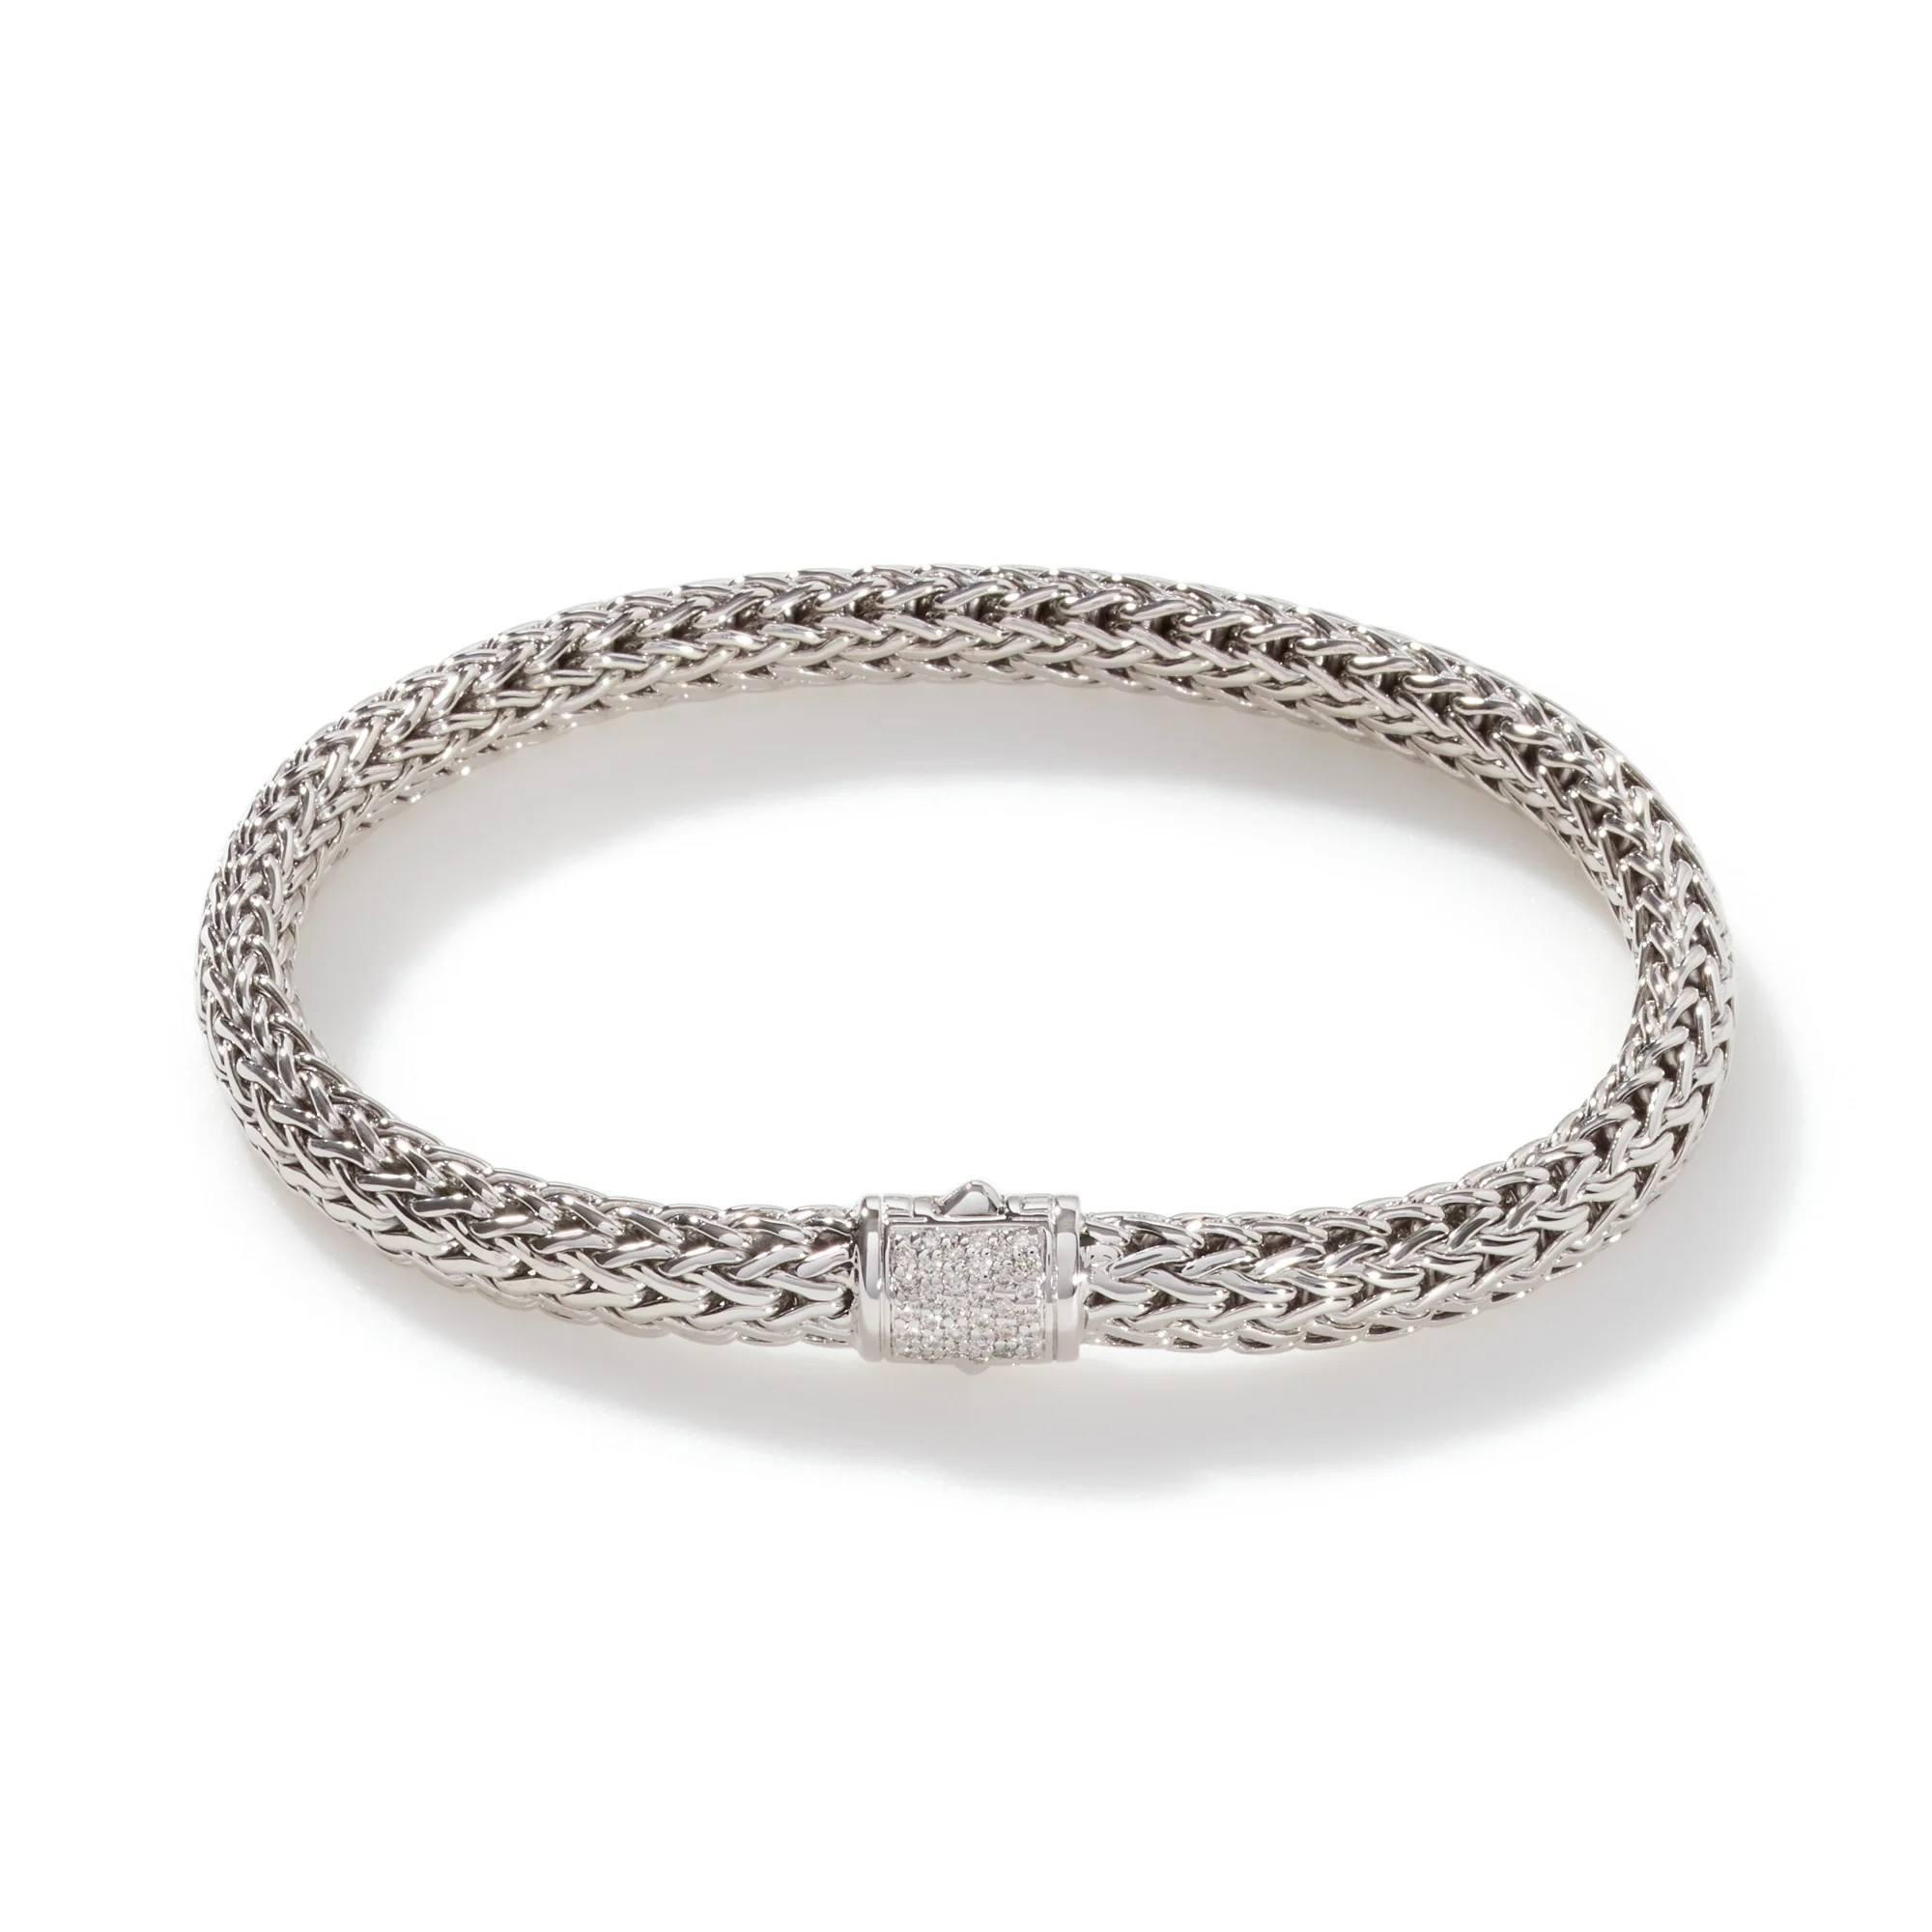 John Hardy Small Woven Chain Bracelet with Diamond Accents 0